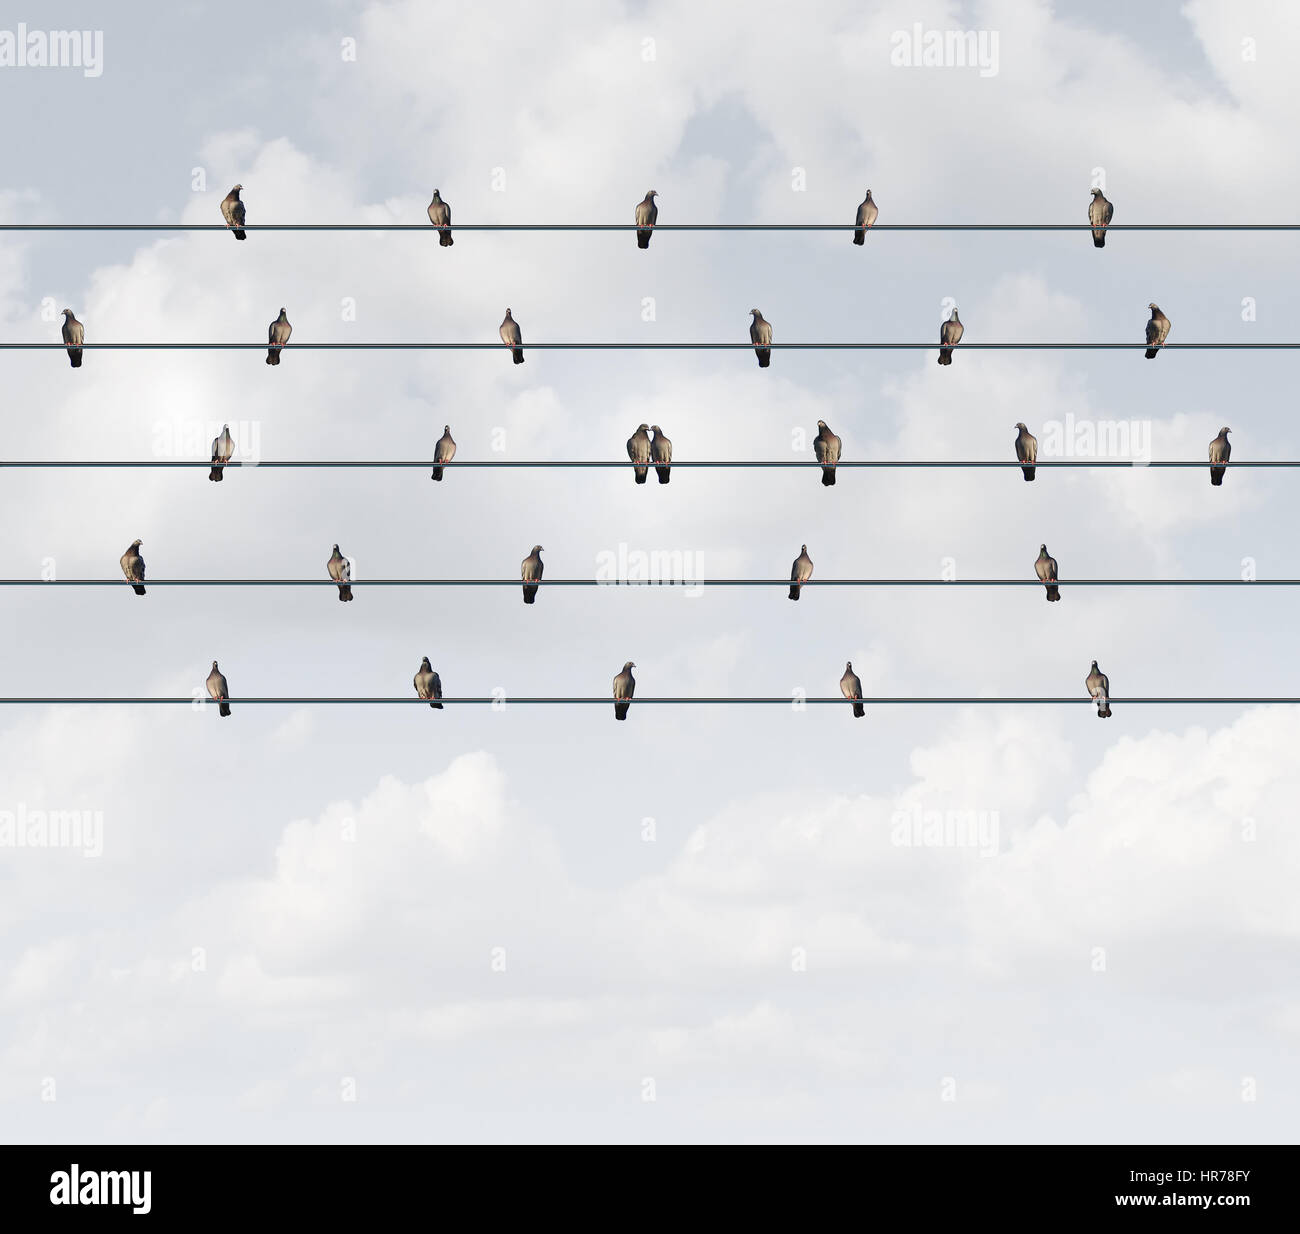 Online dating and connect with a partner concept as a group of birds on a wire with a loving couple bonded together as a metaphor. Stock Photo